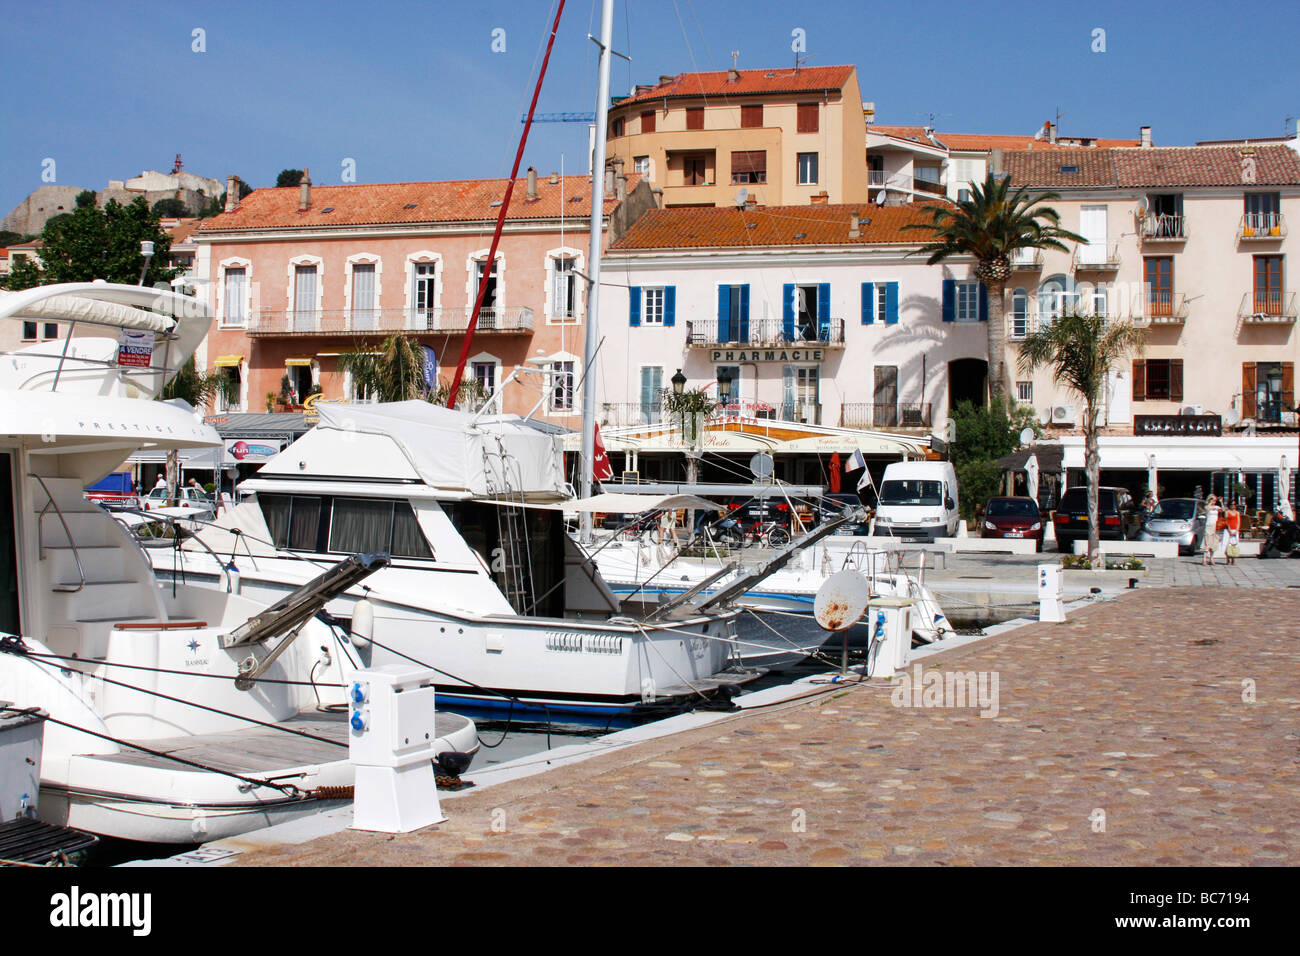 Atmospheric and colorful Calvi is the much visited holiday resort and port on the Mediterranean island of Corsica Stock Photo